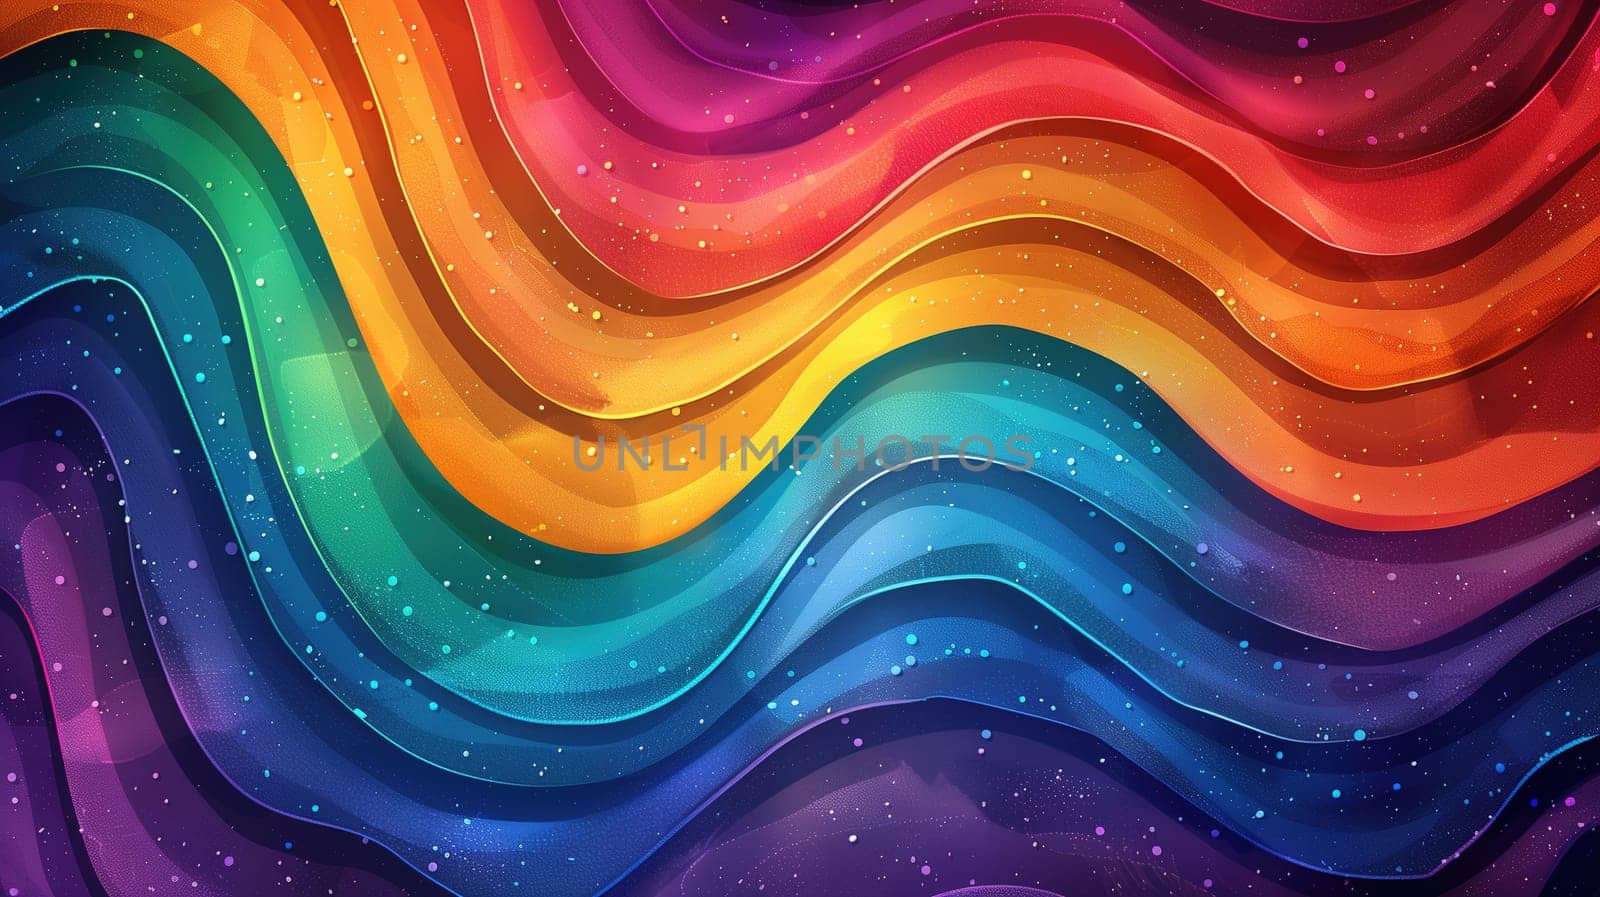 This visually striking background features vibrant colors, wavy lines, and stars scattered throughout. The dynamic composition creates a sense of movement and energy, perfect for a lively design project.